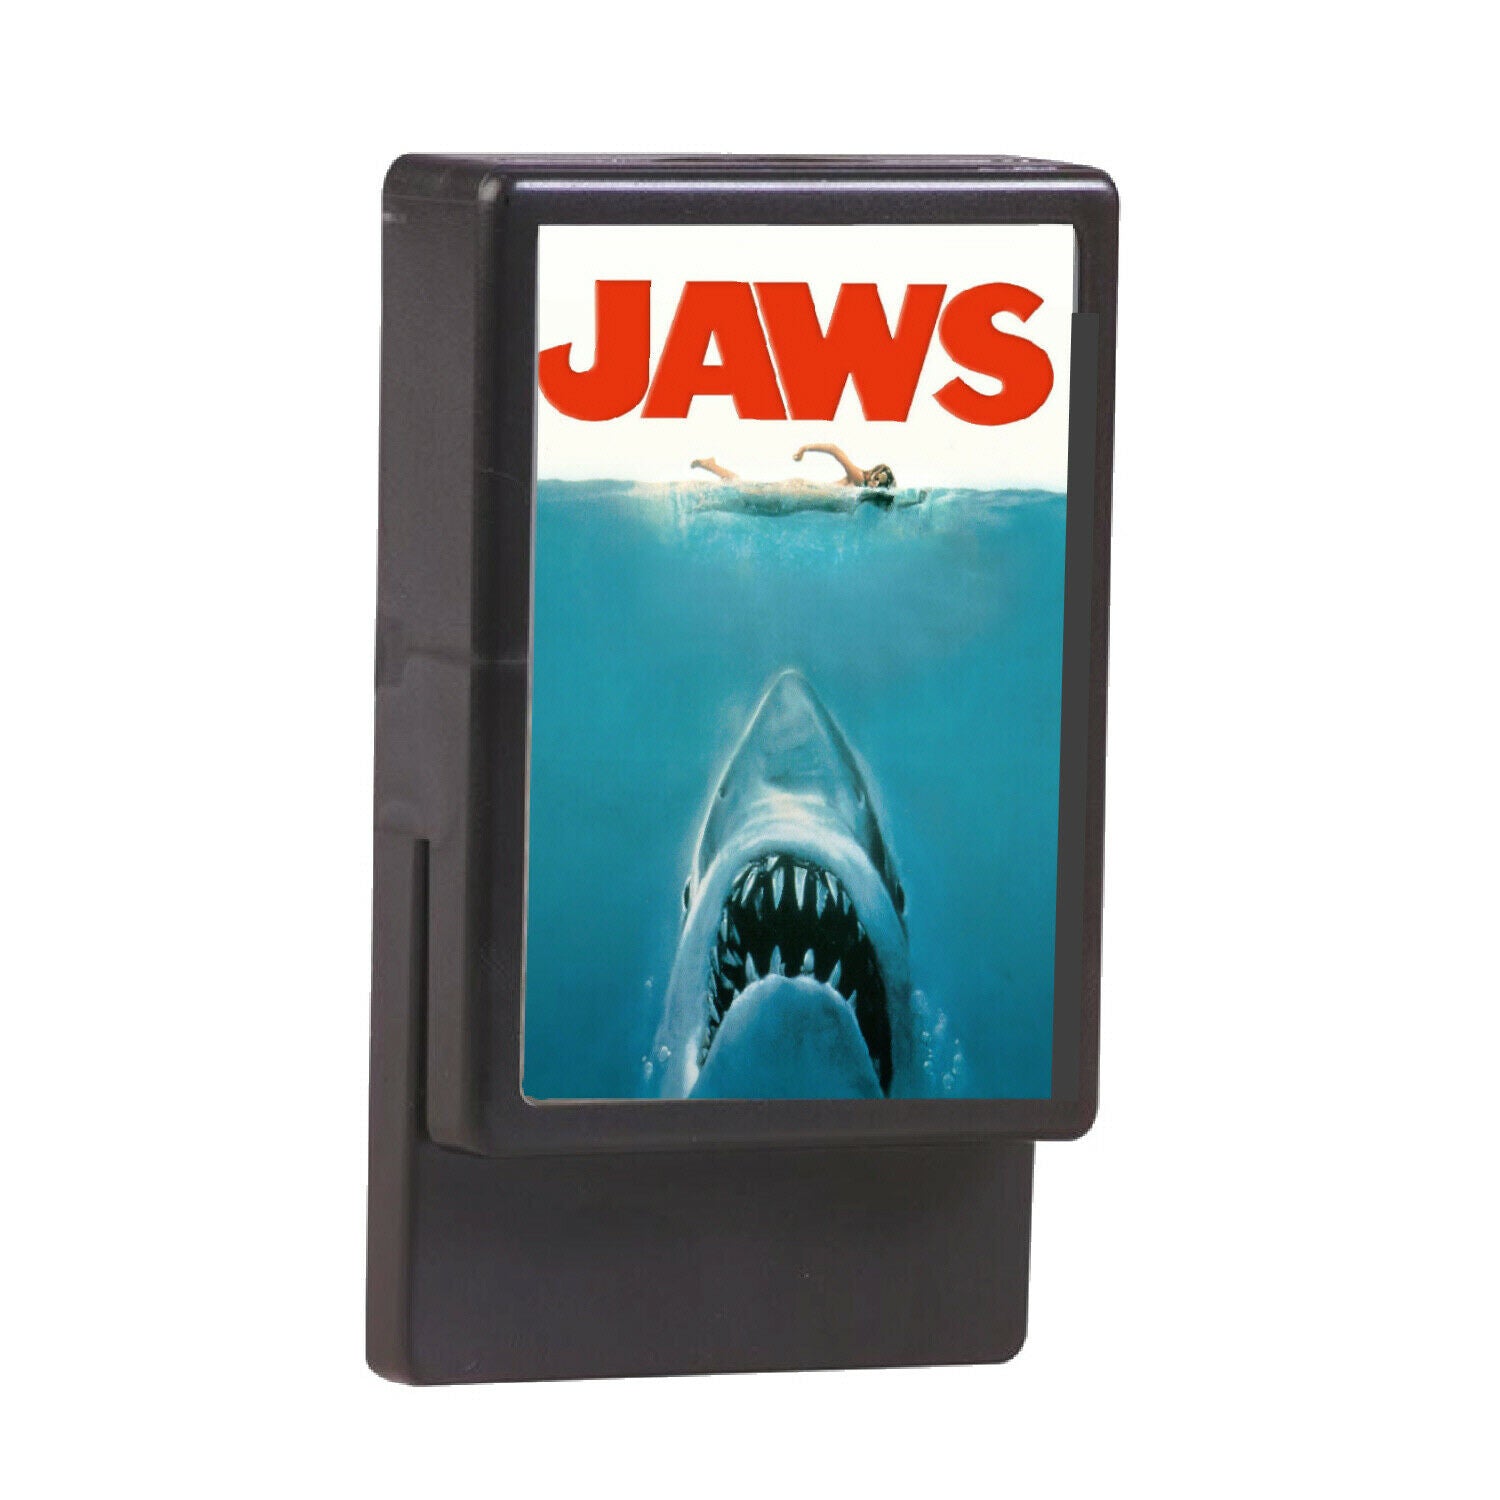 Jaws shark movie poster Magnetic Display Clip Big 4 inches